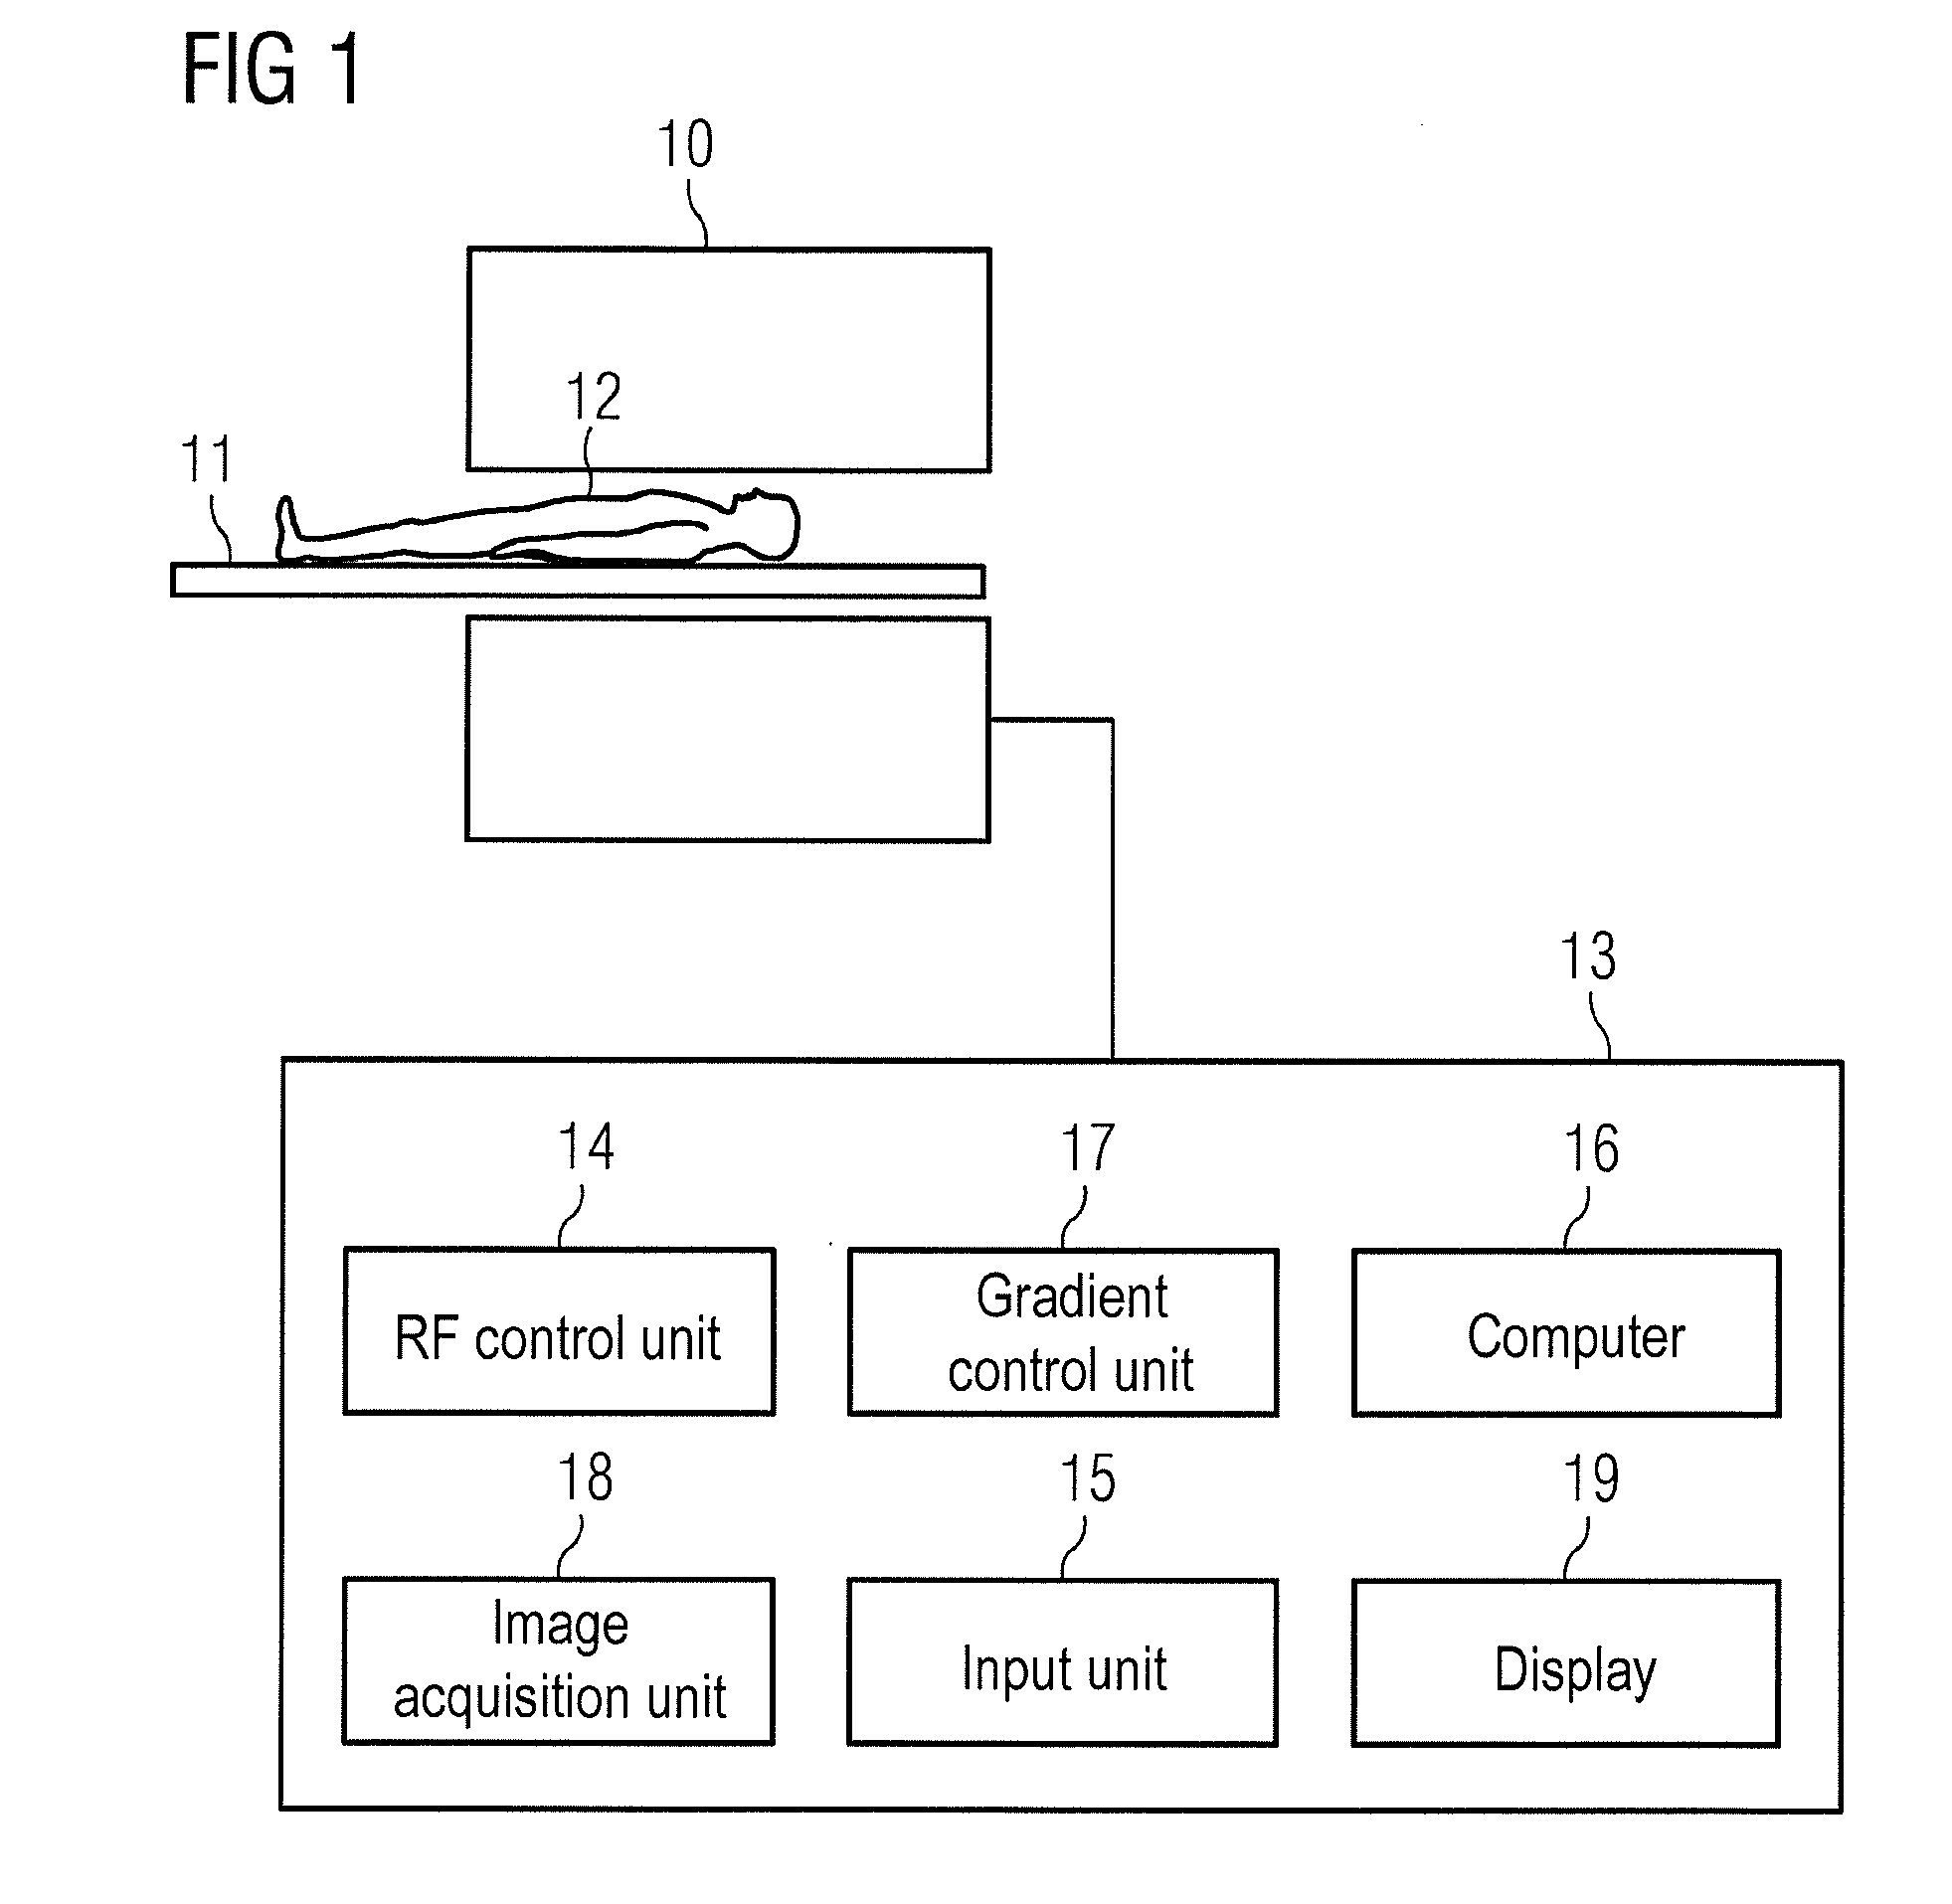 Method and apparatus to generate magnetic resonance angiography images